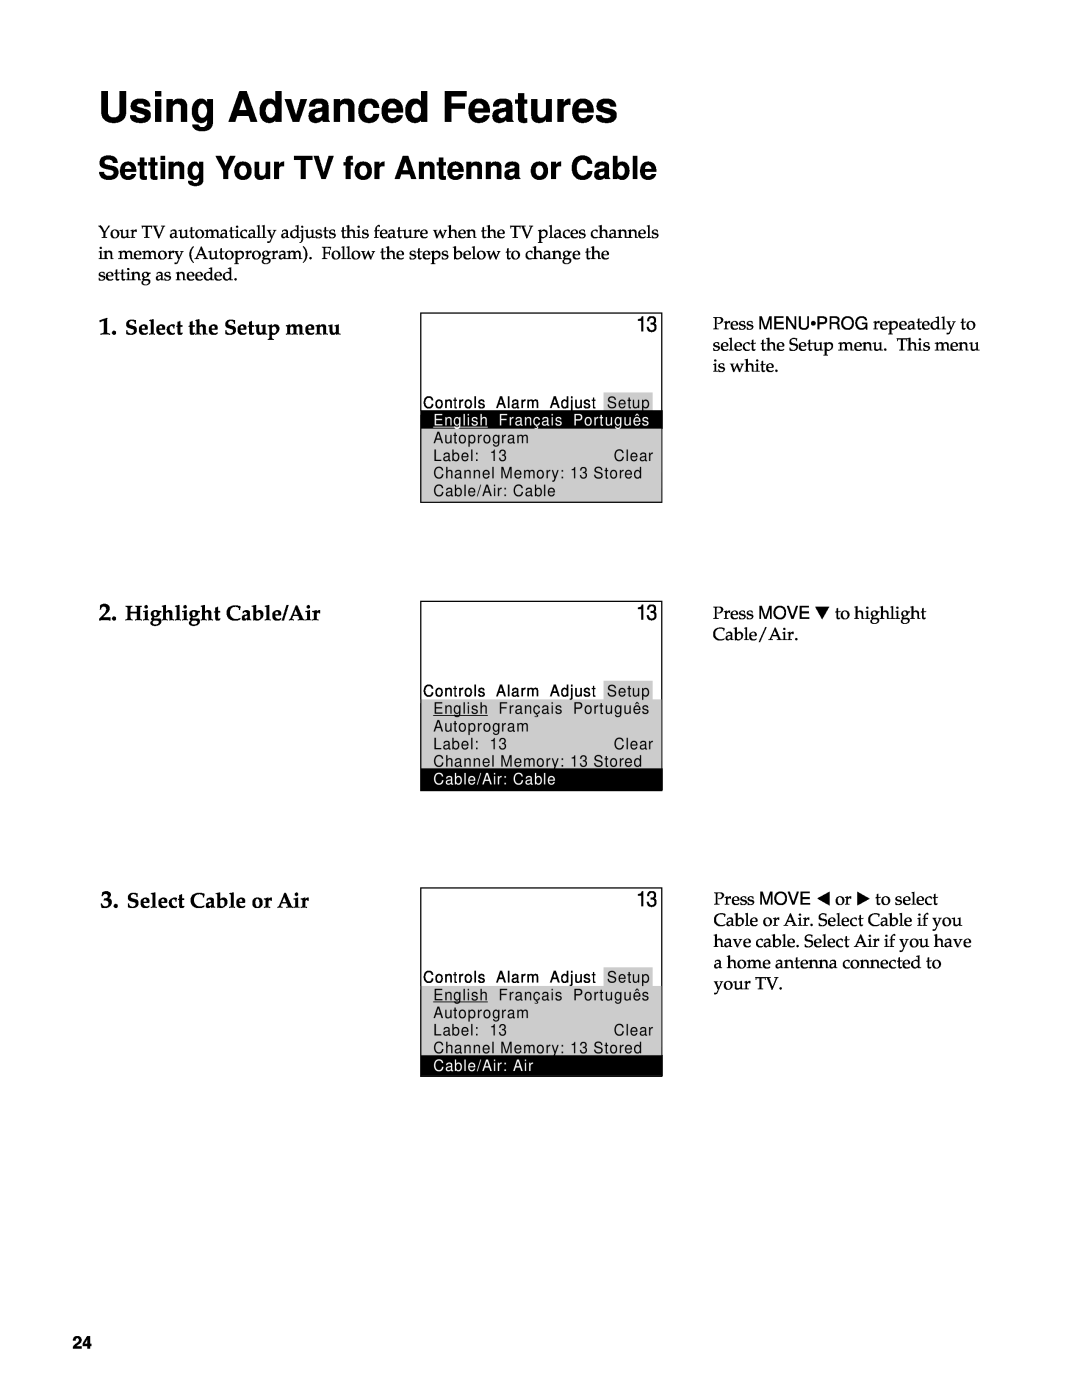 RCA 27000 manual Setting Your TV for Antenna or Cable, Select the Setup menu, Highlight Cable/Air, Select Cable or Air 